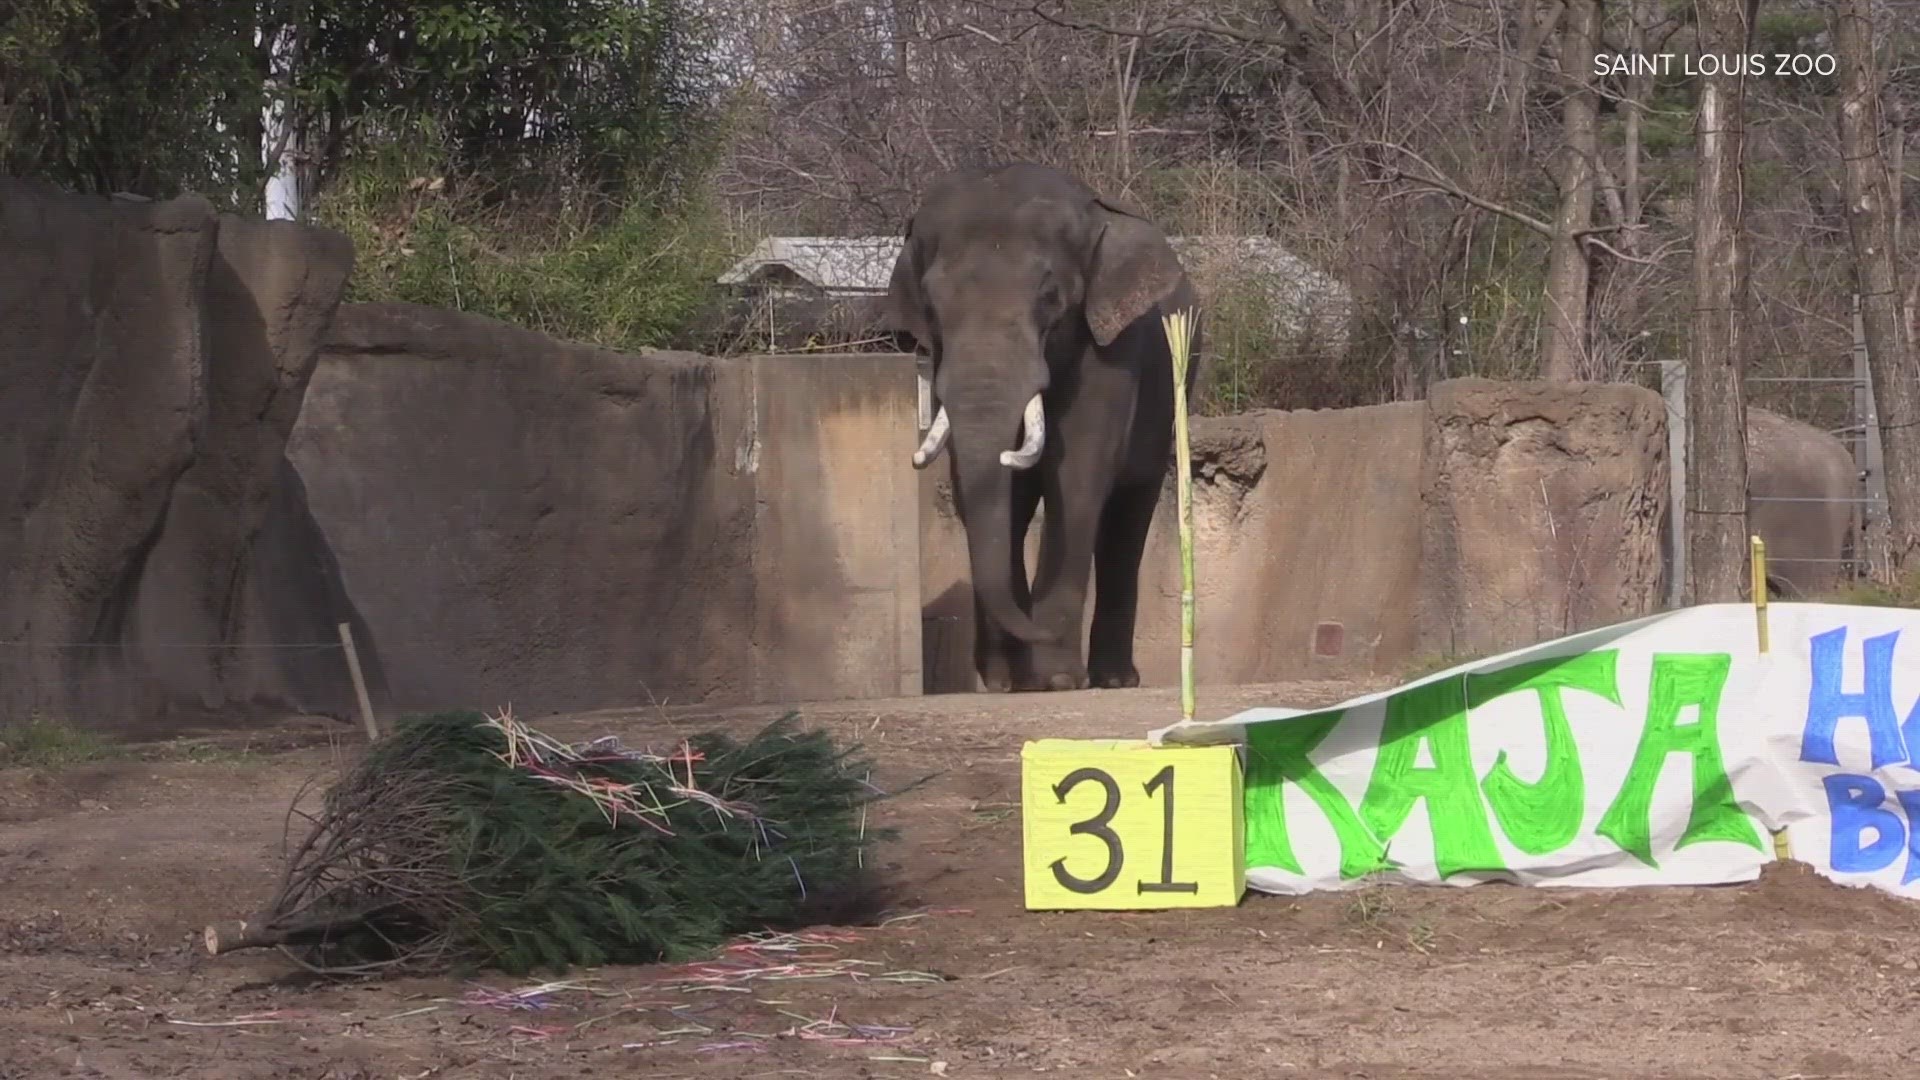 Raja was the first elephant ever born at the Saint Louis Zoo back in 1992. It could be his last birthday in St. Louis, as he's moving in late 2024 or early 2025.